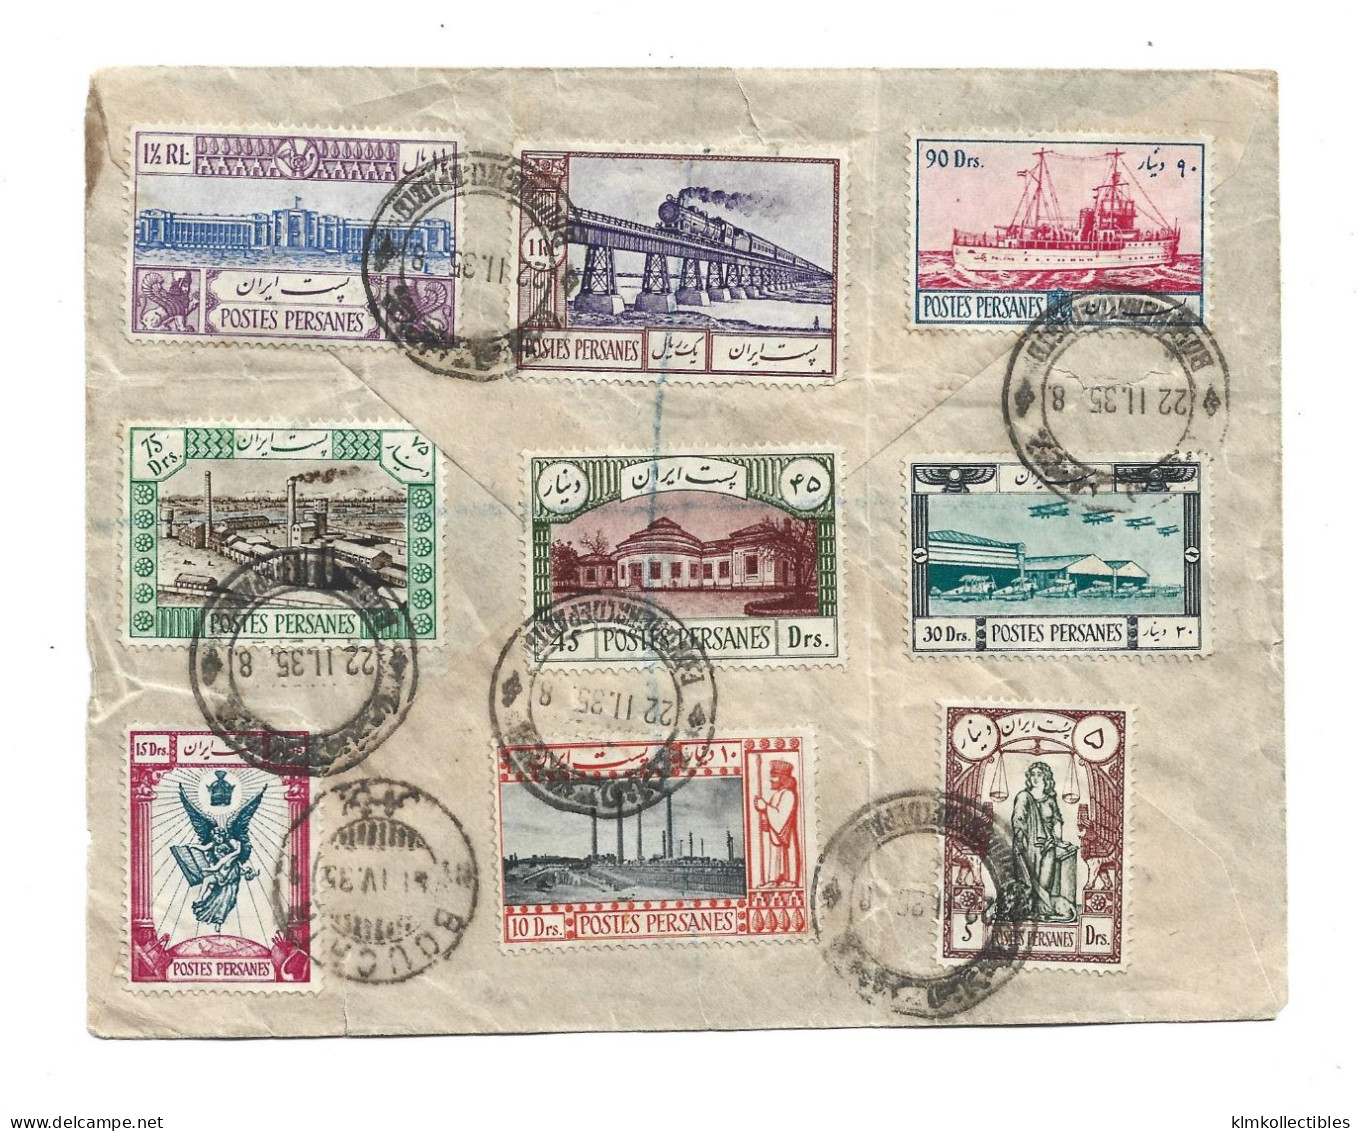 IRAN PERSIA - 1935 BOUCHIR REGISTERED COVER TO ENGLAND - RARE FULL SET NOT COVER REAL CIRCULATION REDIRECTED RETURNED - Iran